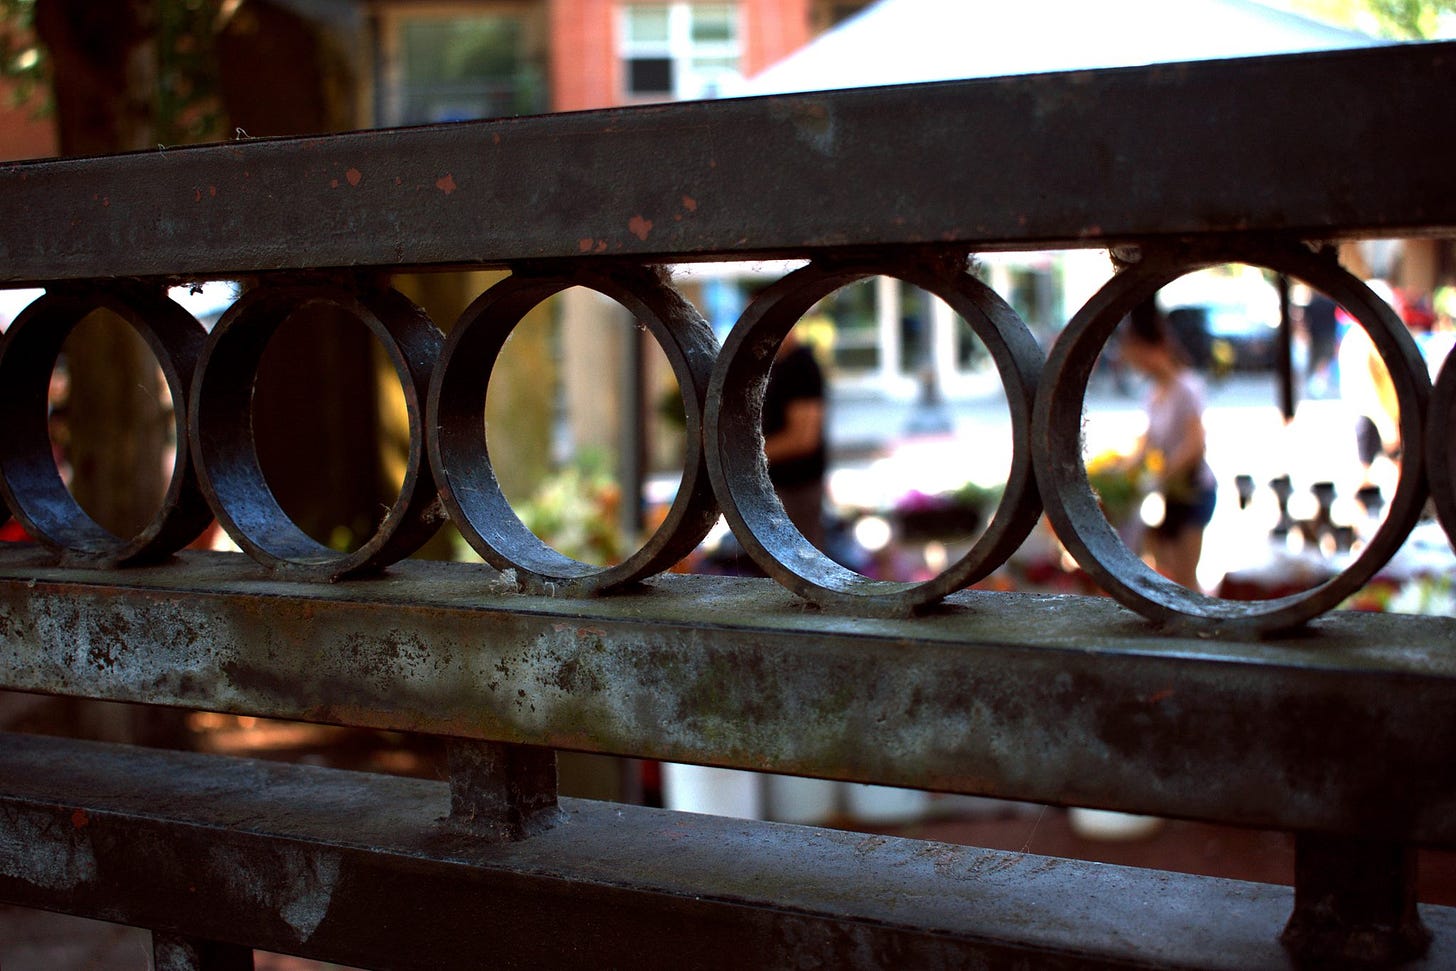 Photograph of an old gate, through which we see people at Vancouver Farmer's Market buying colorful flowers.